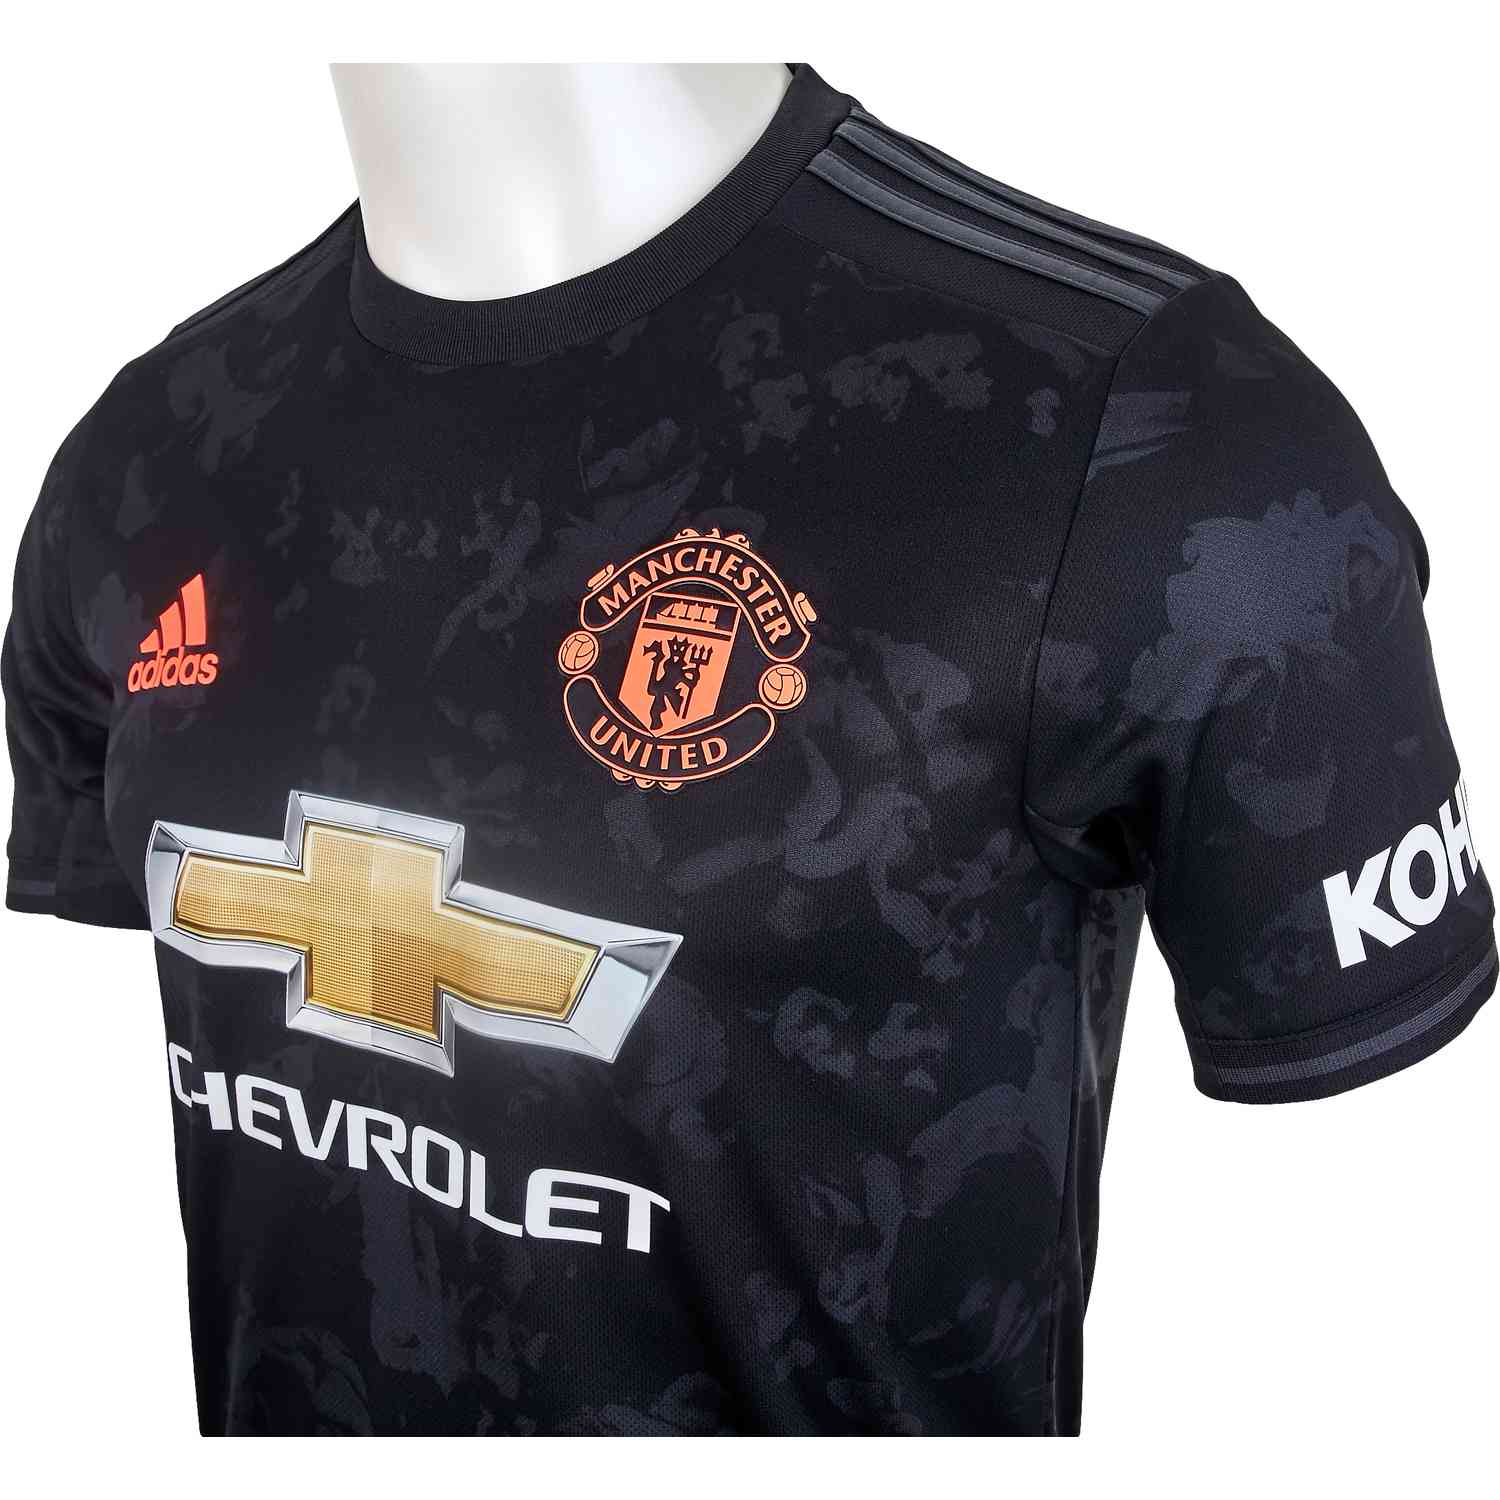 3rd jersey manchester united